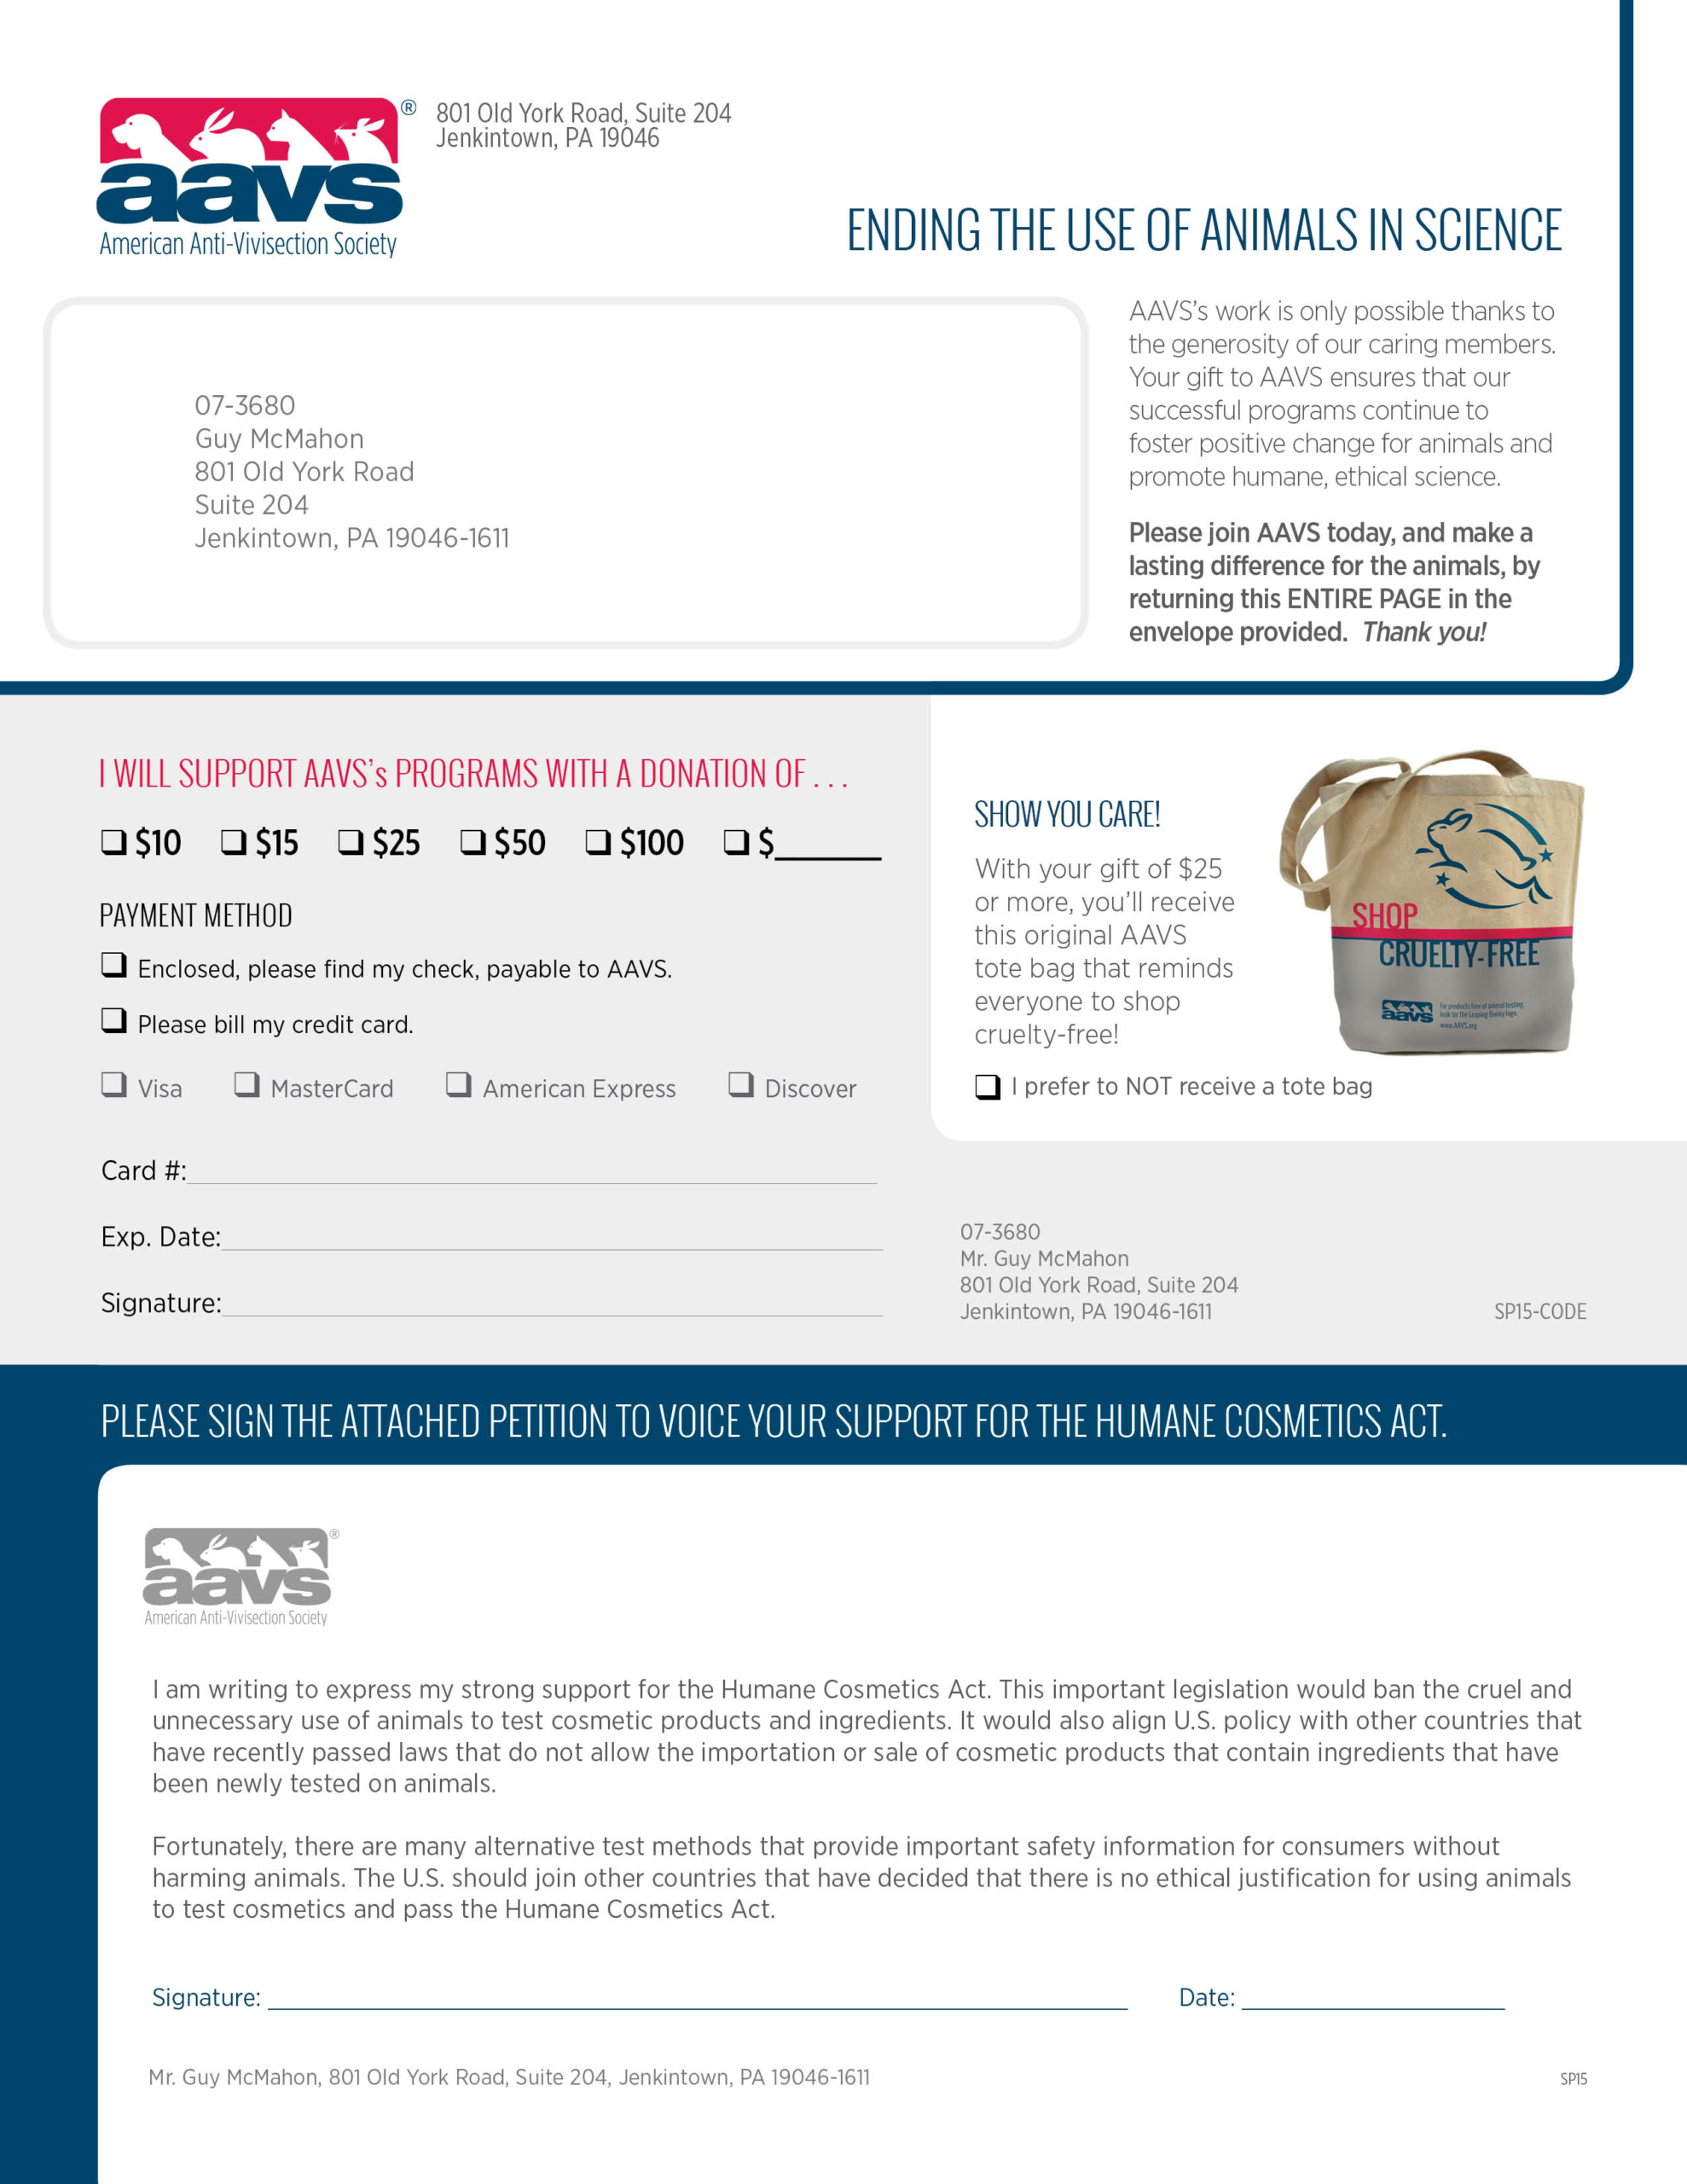 AAVS - Acquisition Mailing Package - Response Device Front